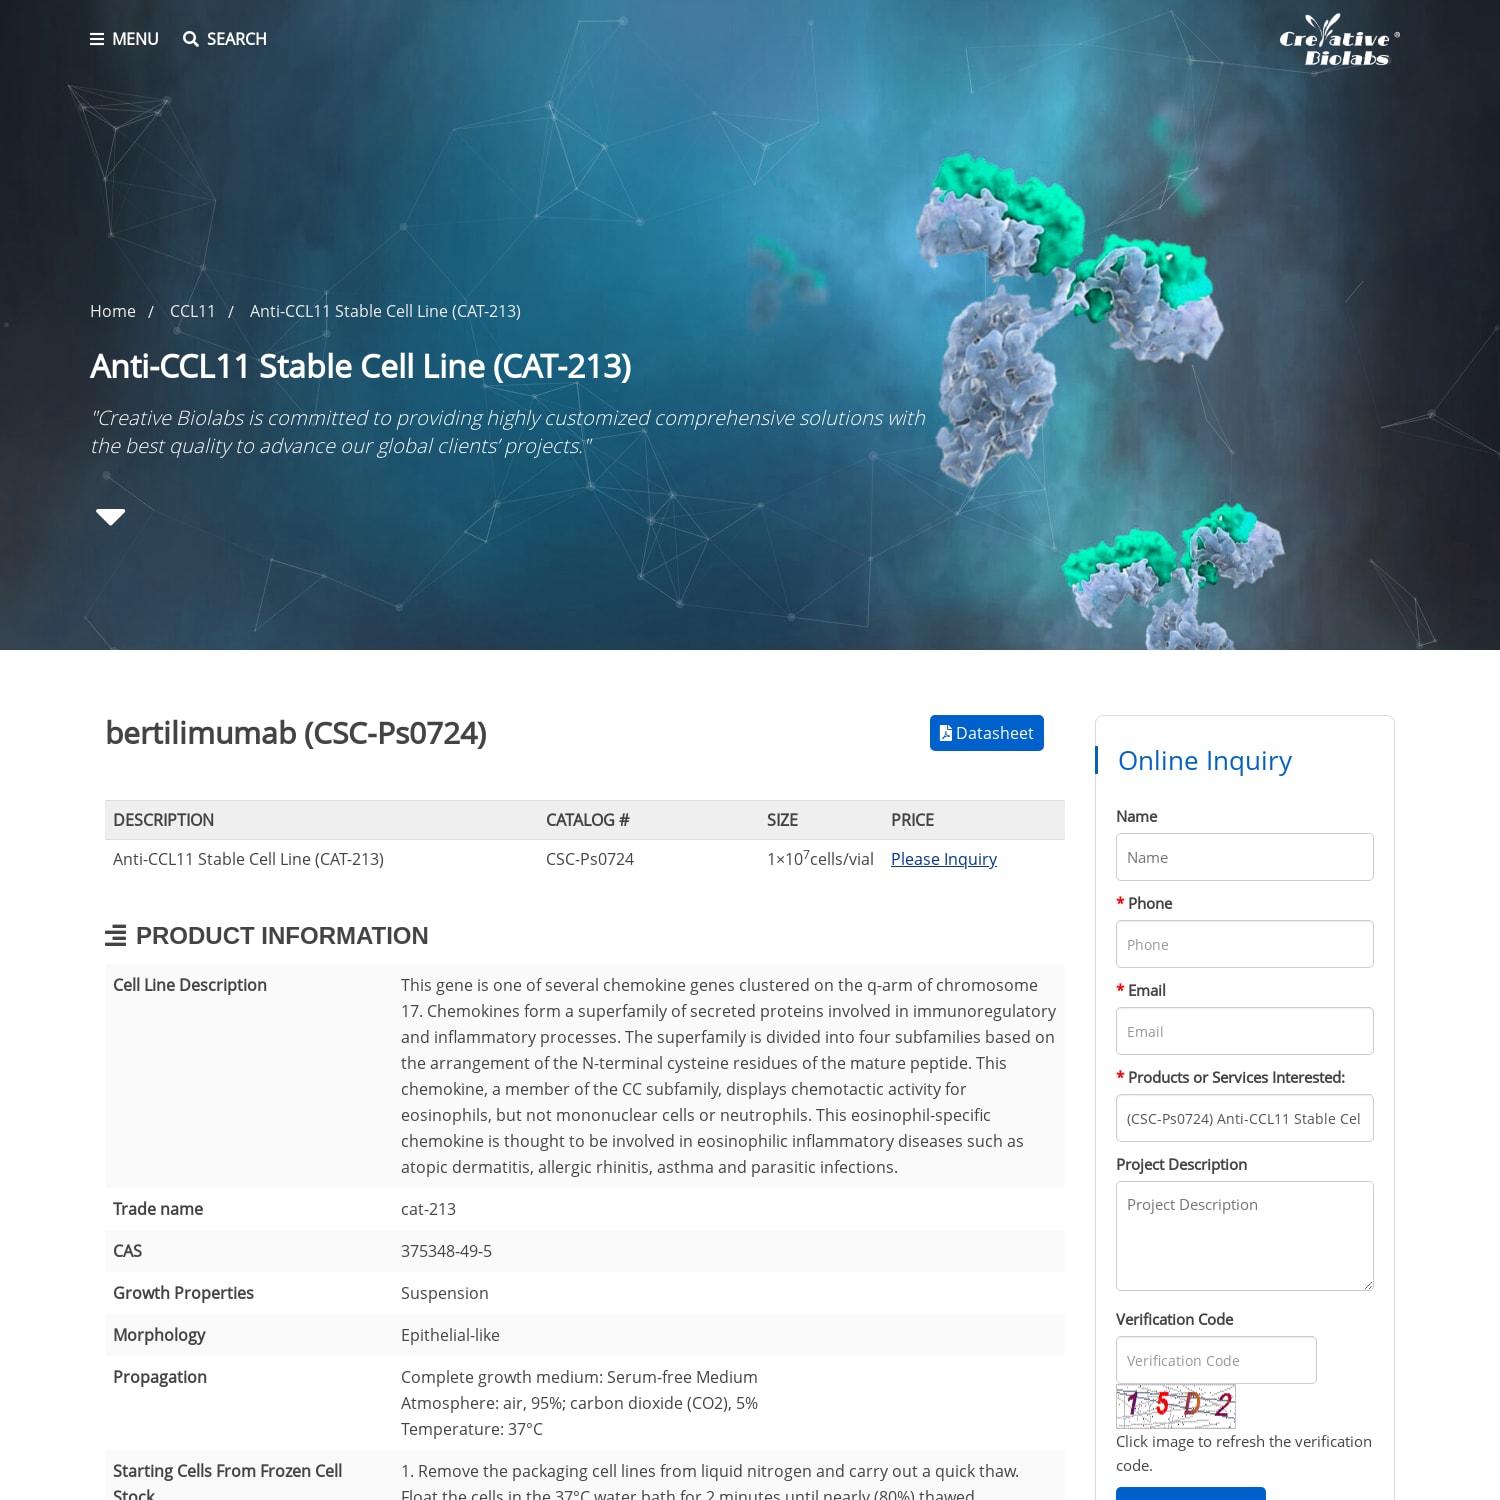 Anti-CCL11 Stable Cell Line (CAT-213), bertilimumab - Creative Biolabs